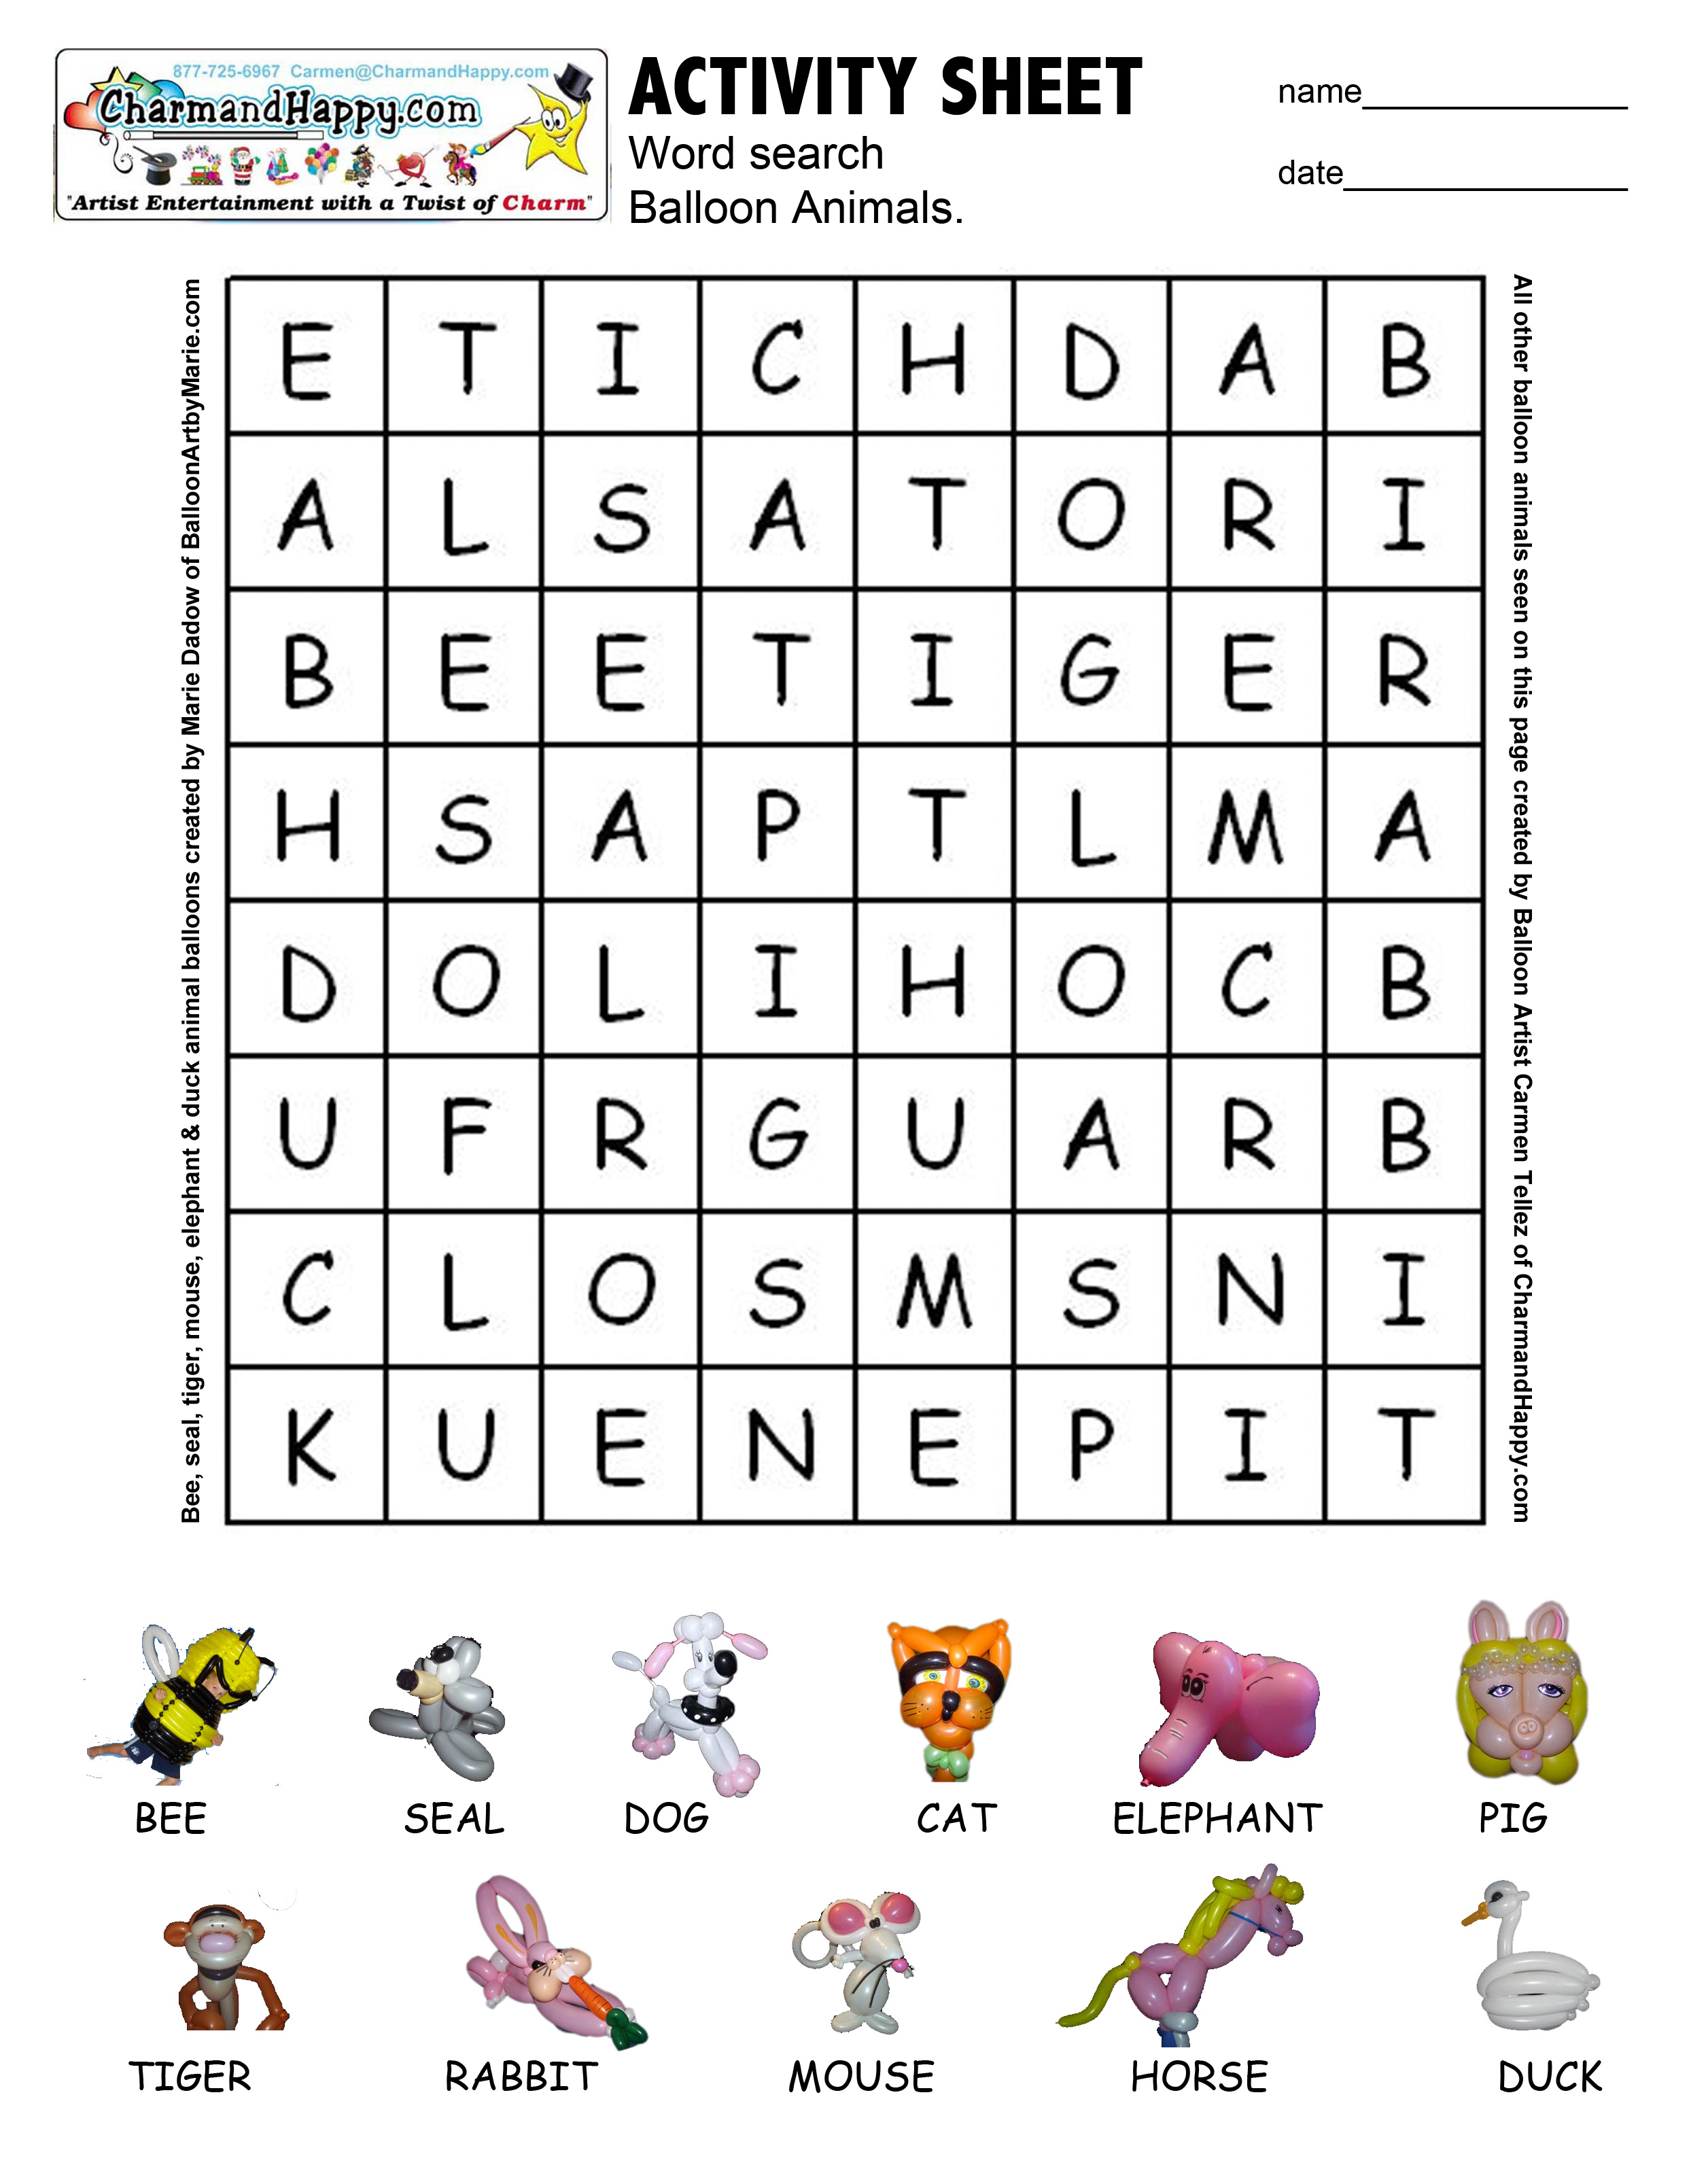 CharmandHappy.com kids activity sheet word search